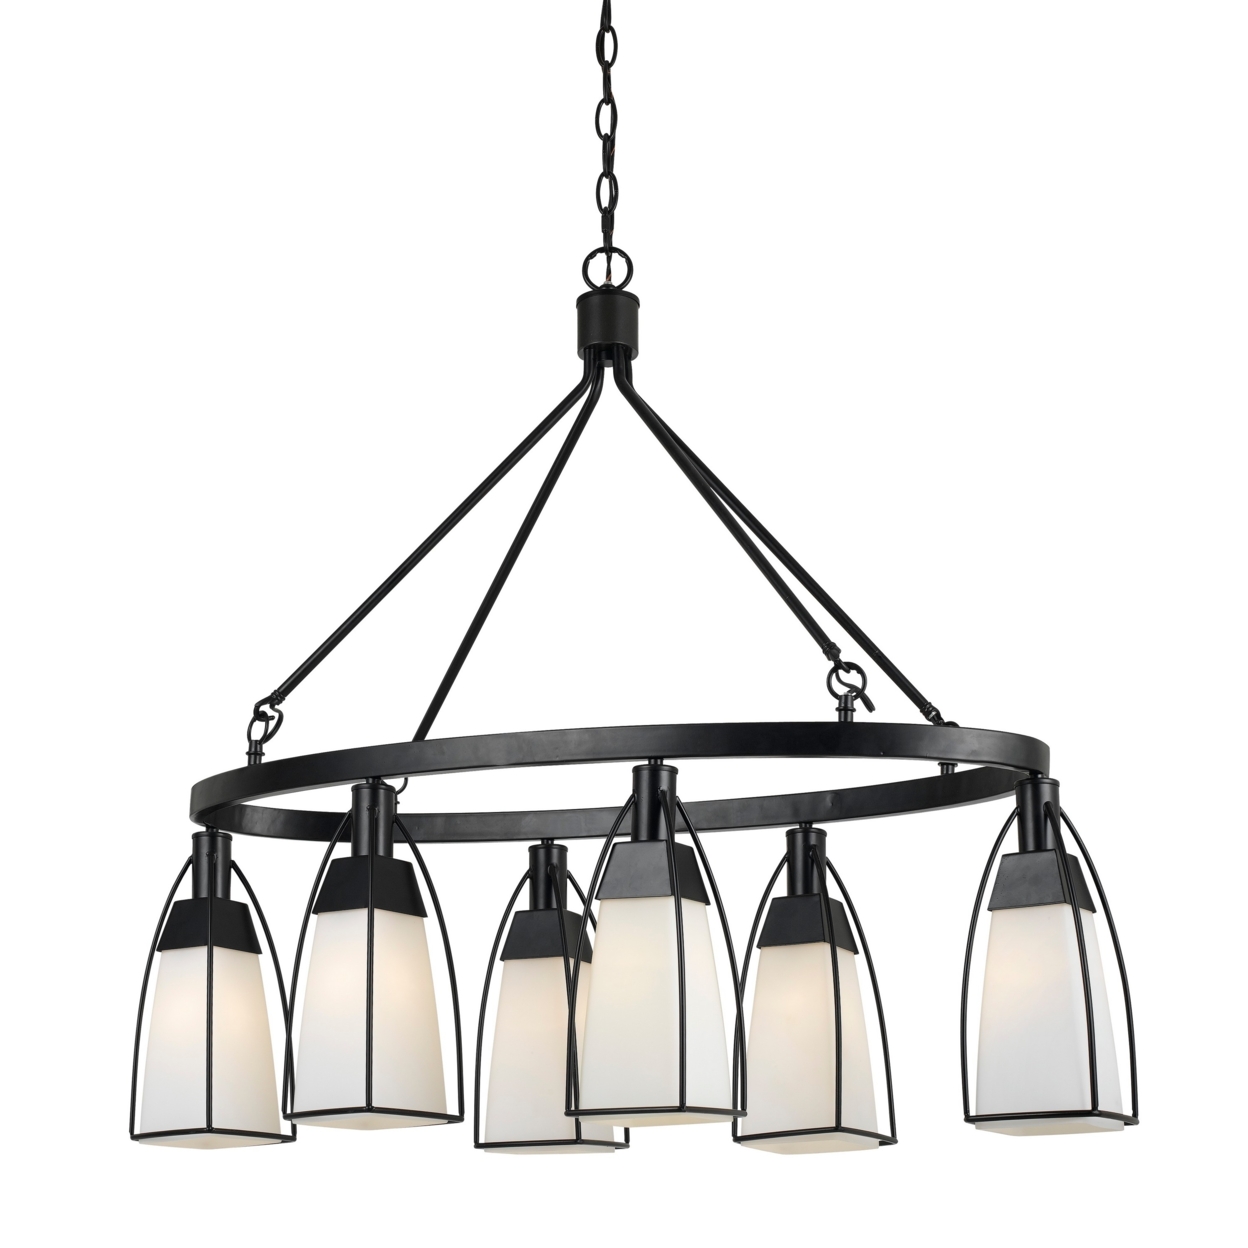 6 Bulb Oval Metal Frame Chandelier With Glass Shades, Black And White- Saltoro Sherpi